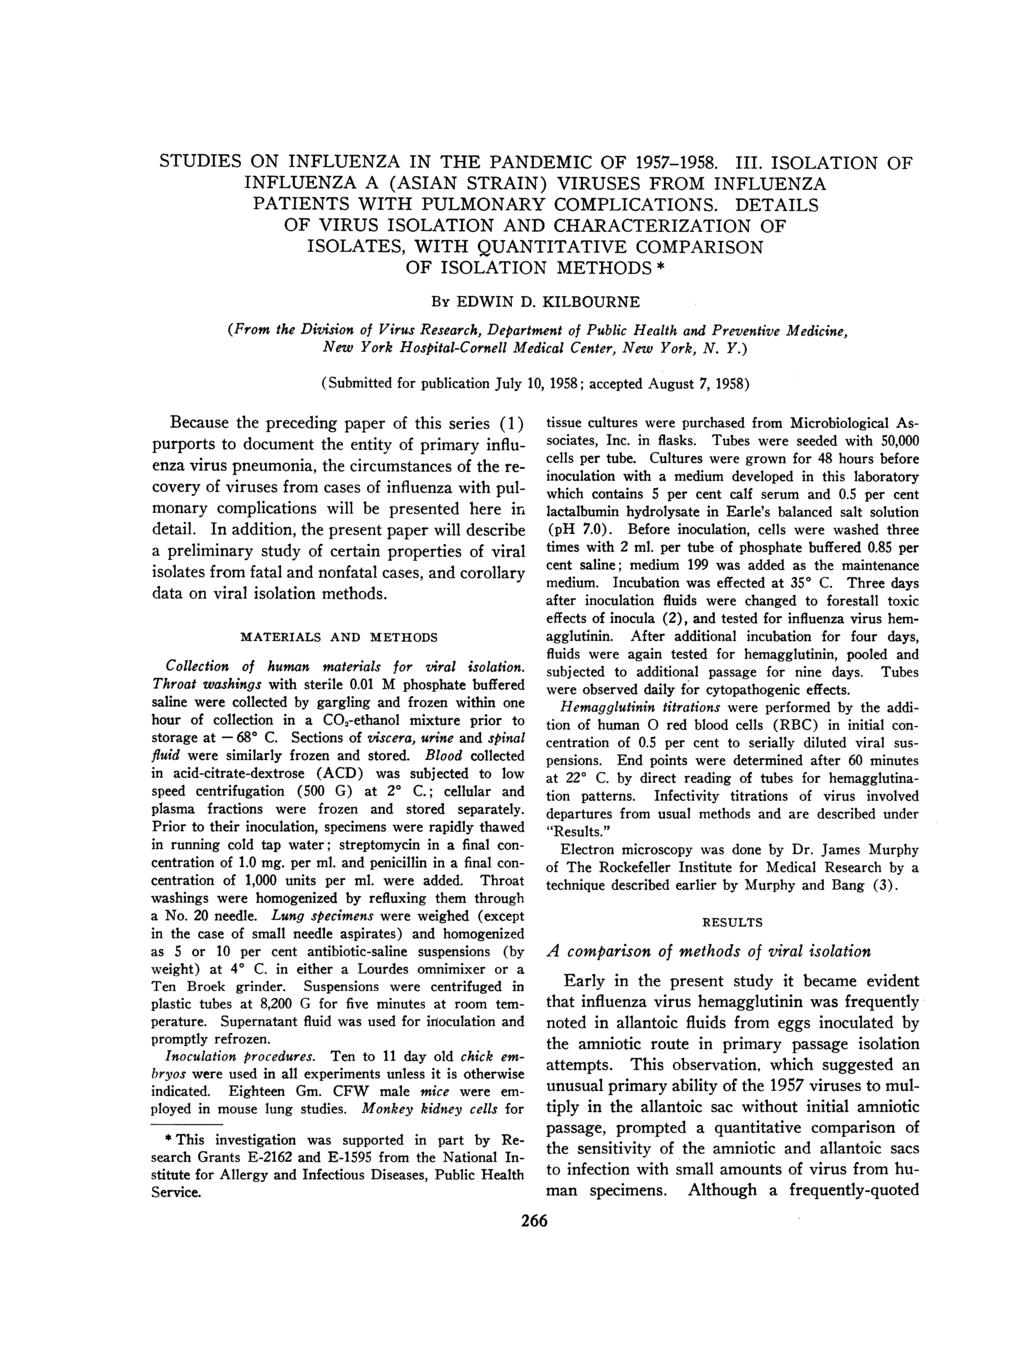 STUDIES ON INFLUENZA IN THE PANDEMIC OF 1957-1958. III. ISOLATION OF INFLUENZA A (ASIAN STRAIN) VIRUSES FROM INFLUENZA PATIENTS WITH PULMONARY COMPLICATIONS.